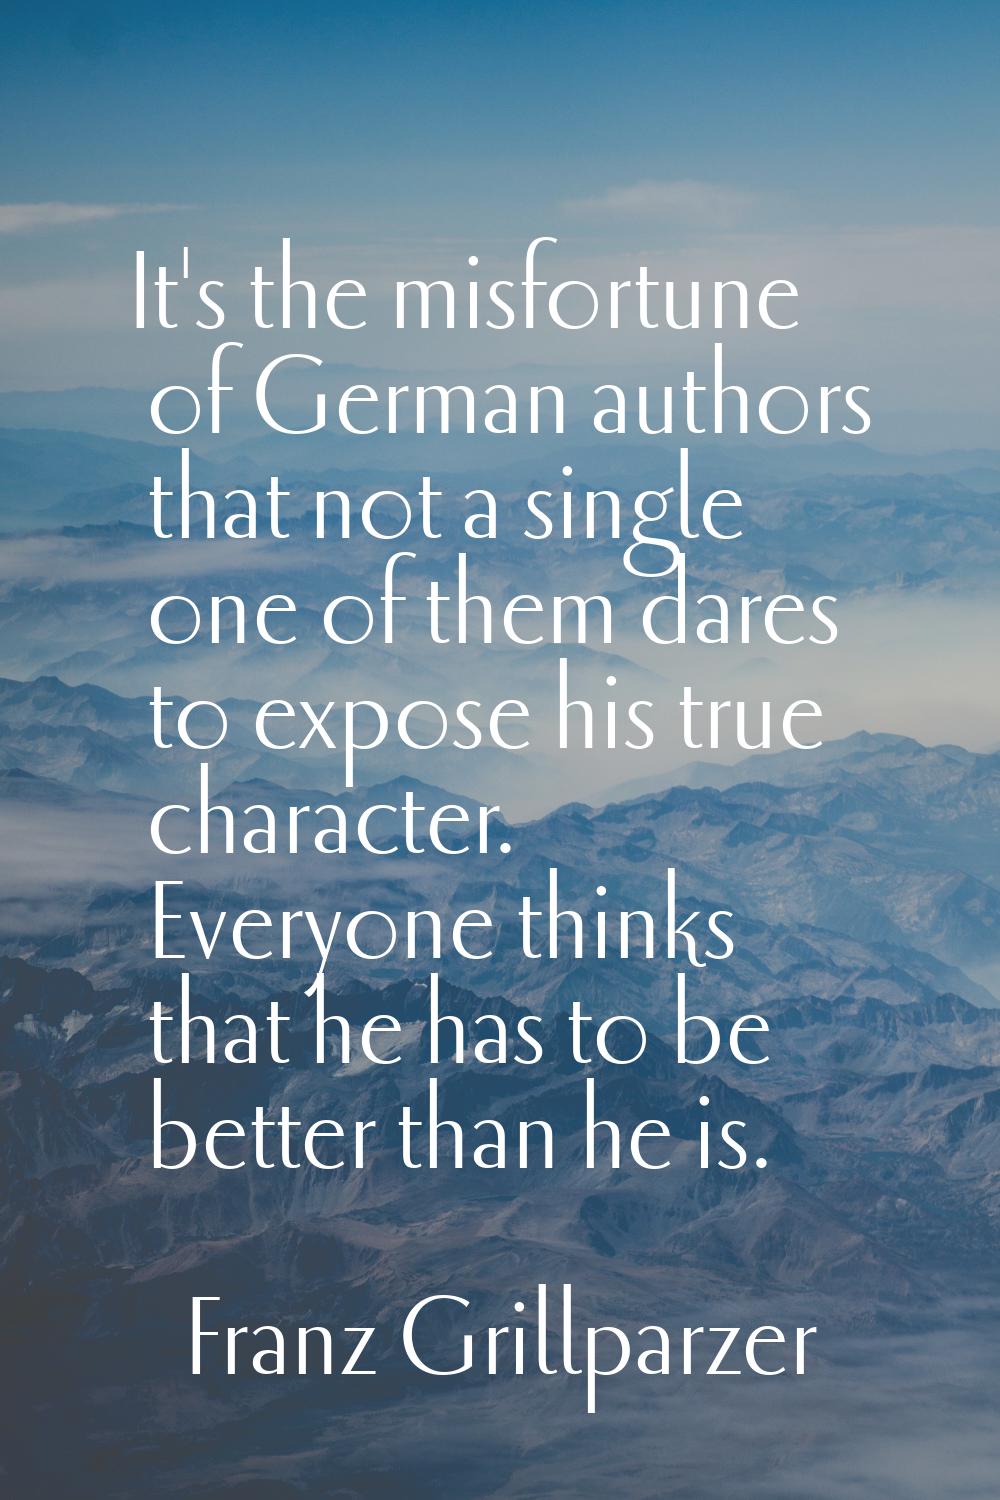 It's the misfortune of German authors that not a single one of them dares to expose his true charac